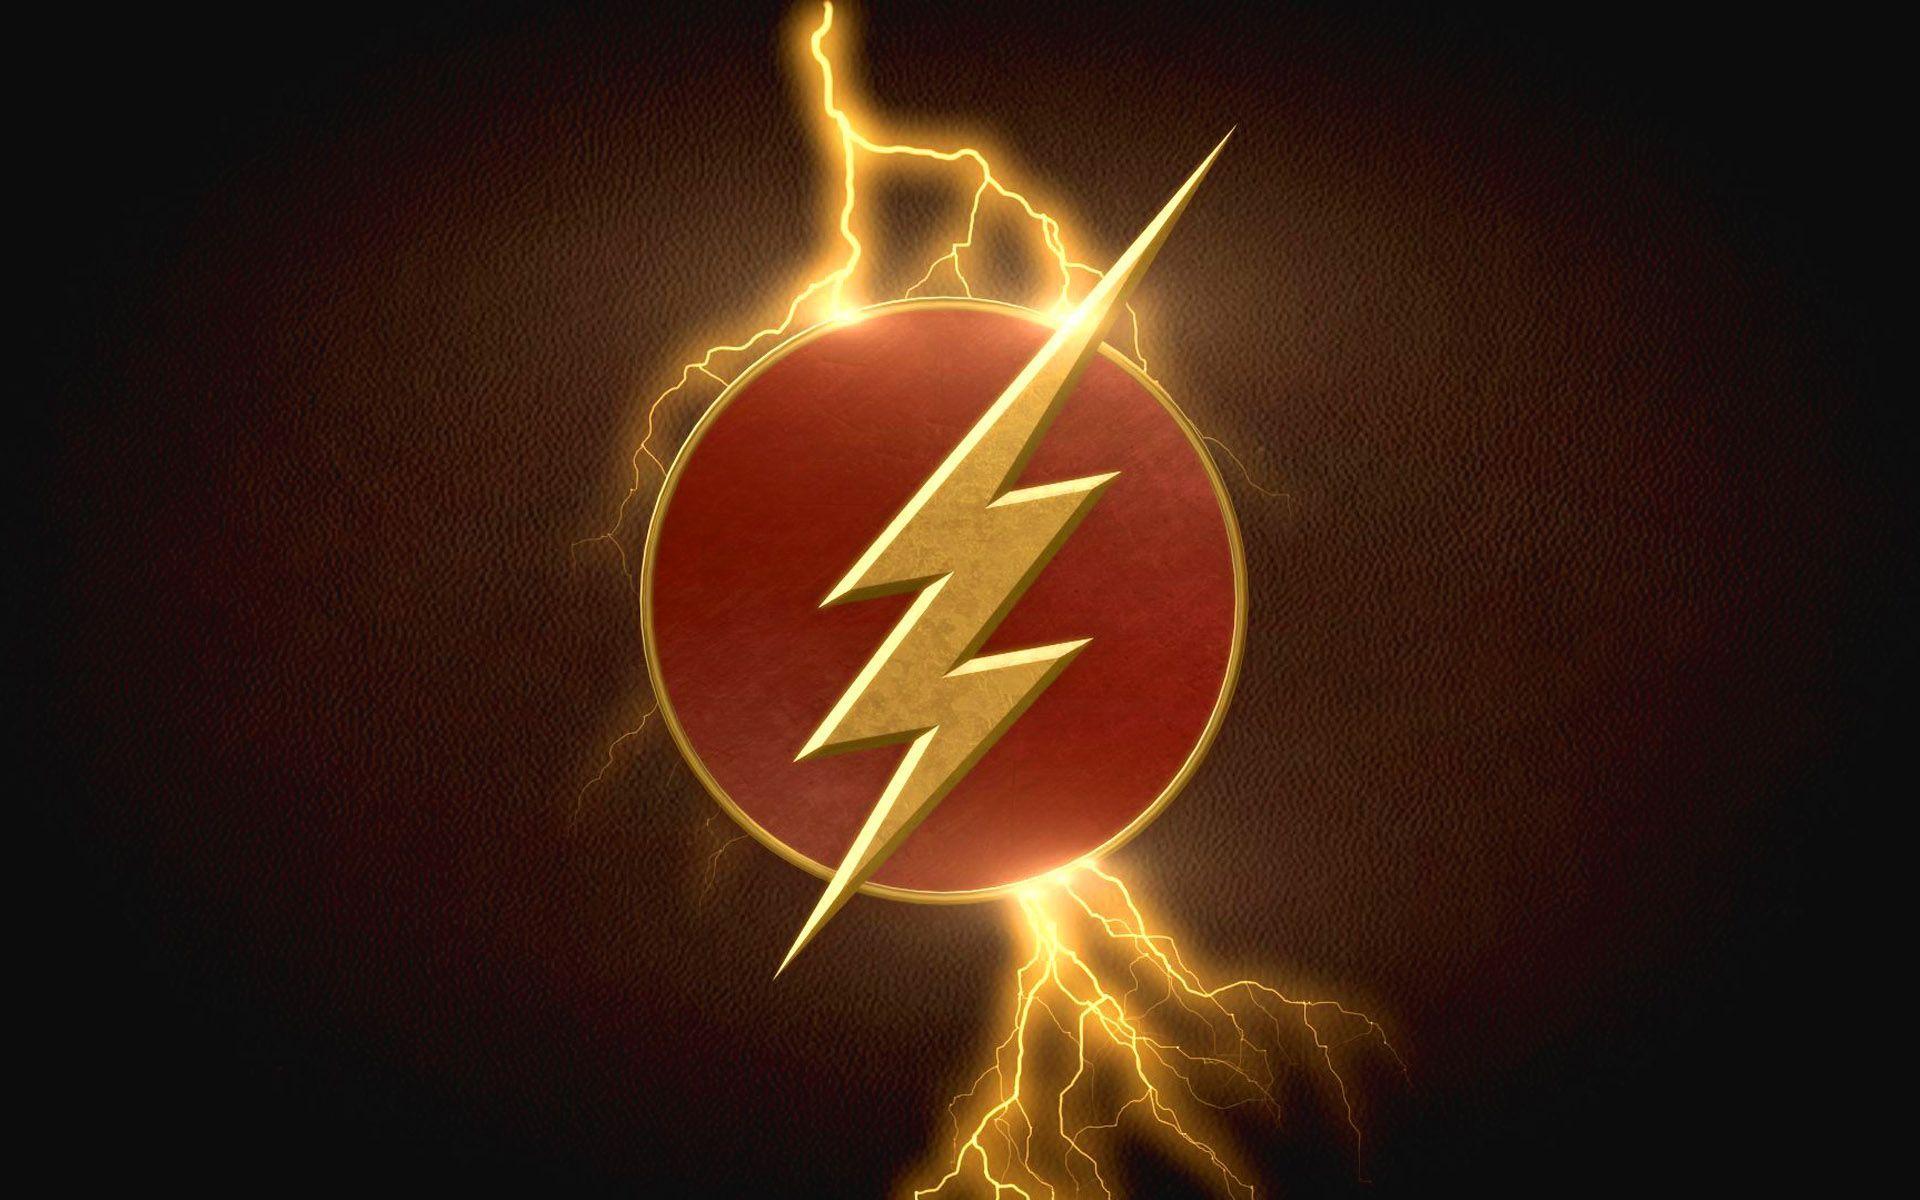 The Flash CW Logo Wallpaper. Projects to Try